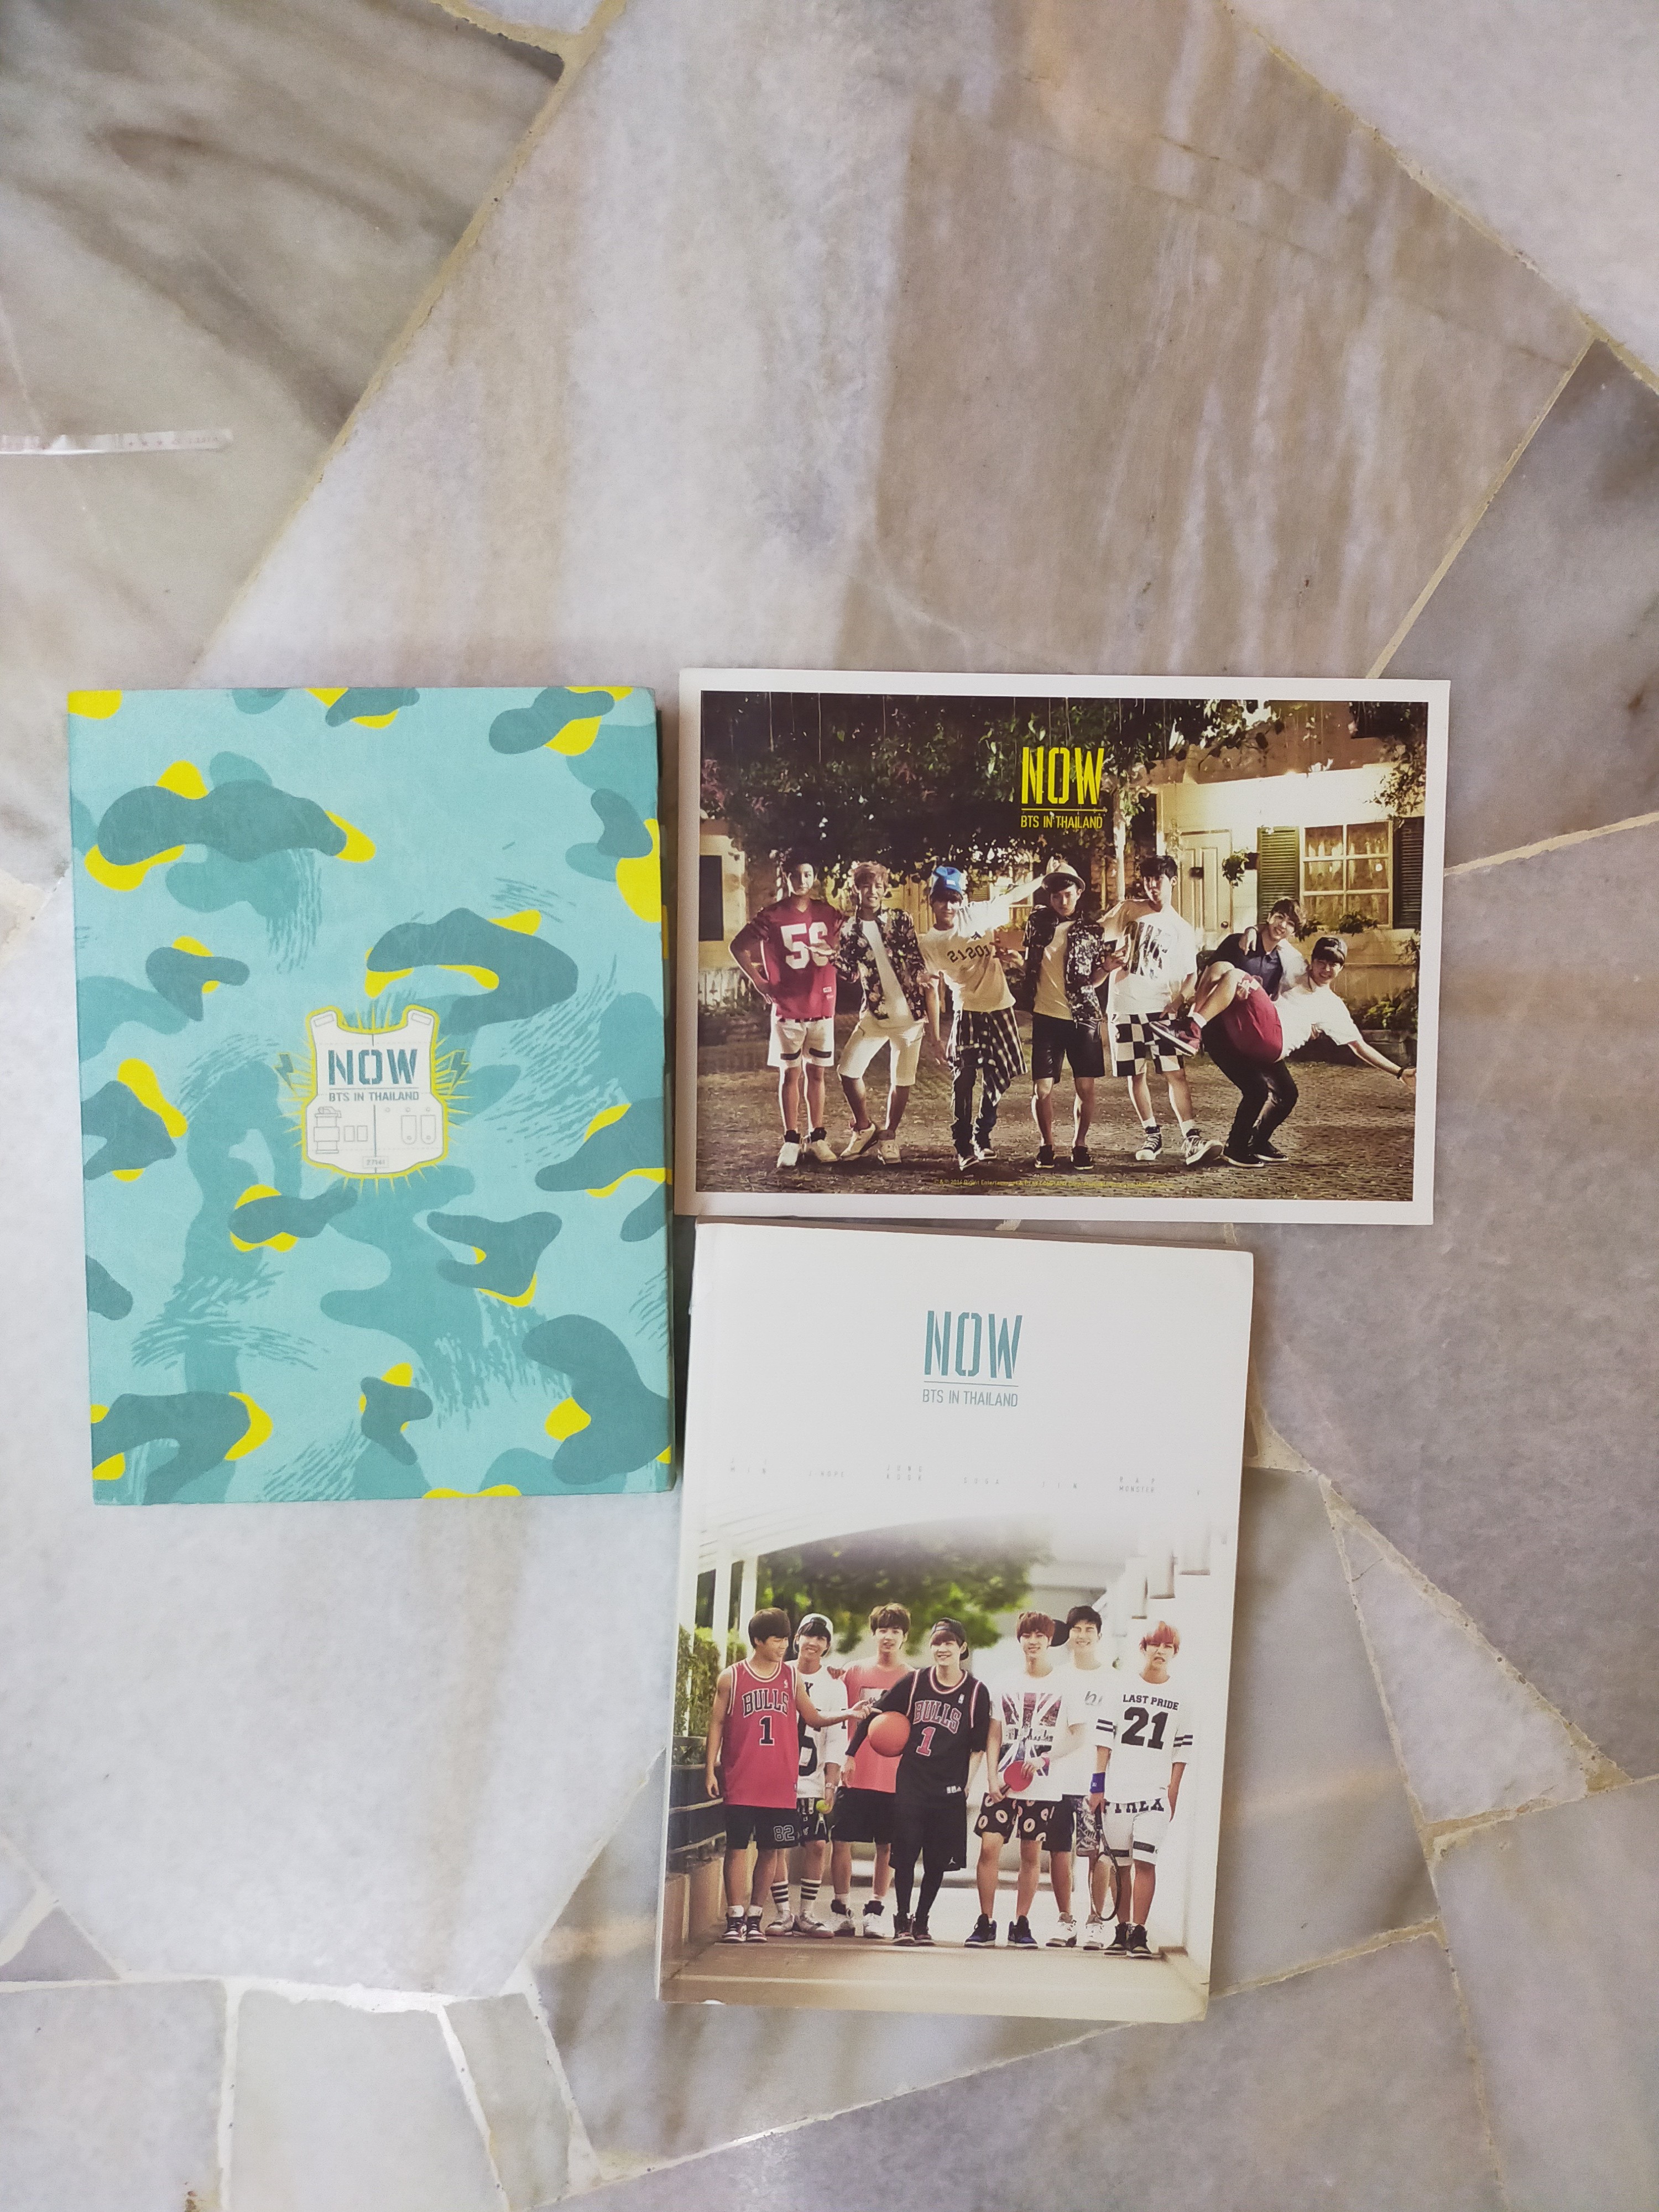 BTS NOW 1 in thailand photobook poster and outerbox, Hobbies